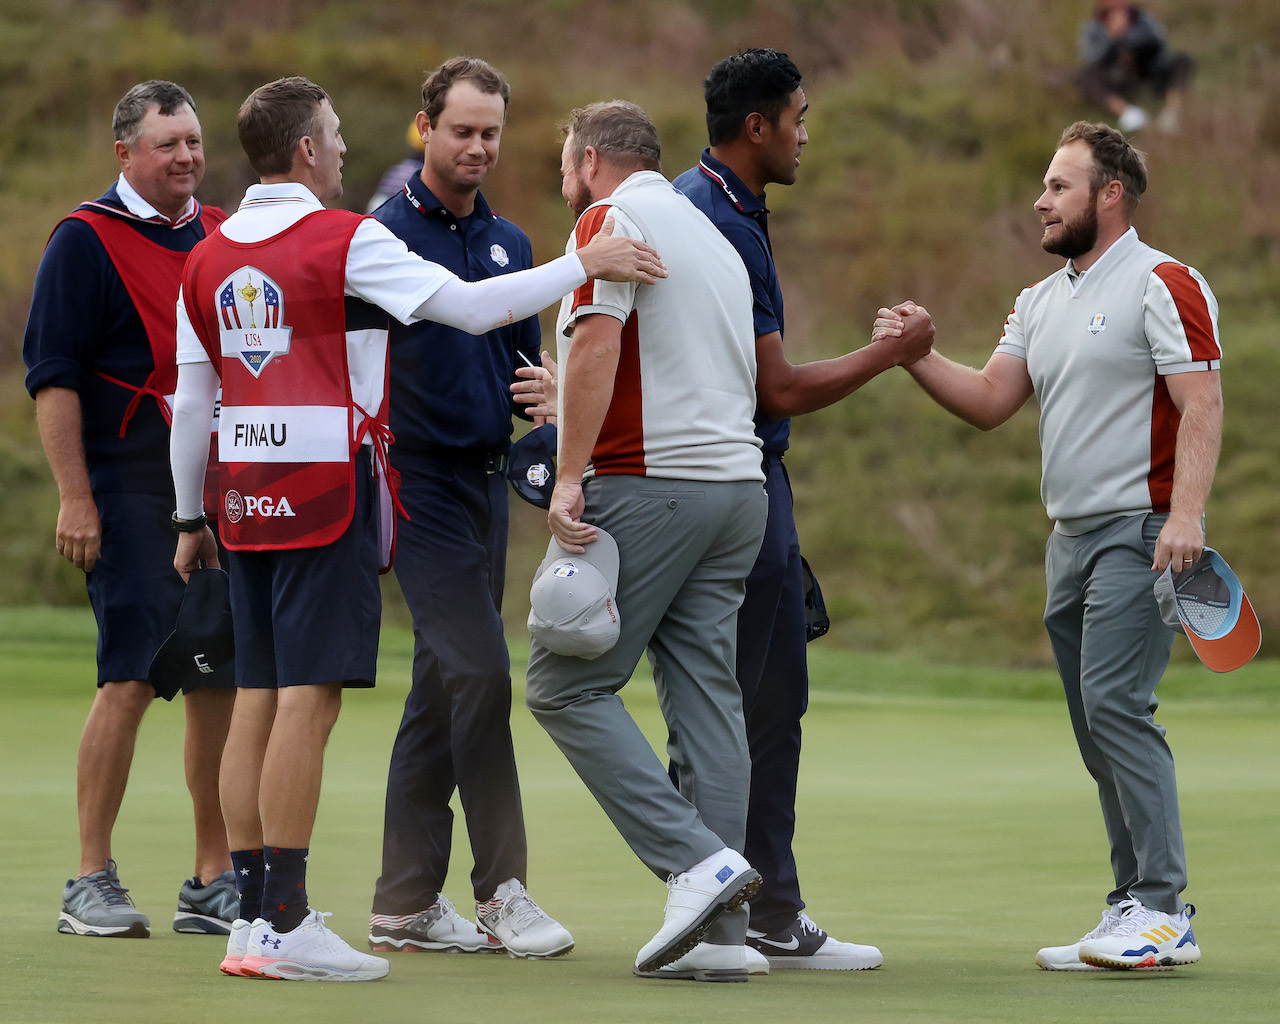 Golfers shaking hands at Ryder Cup